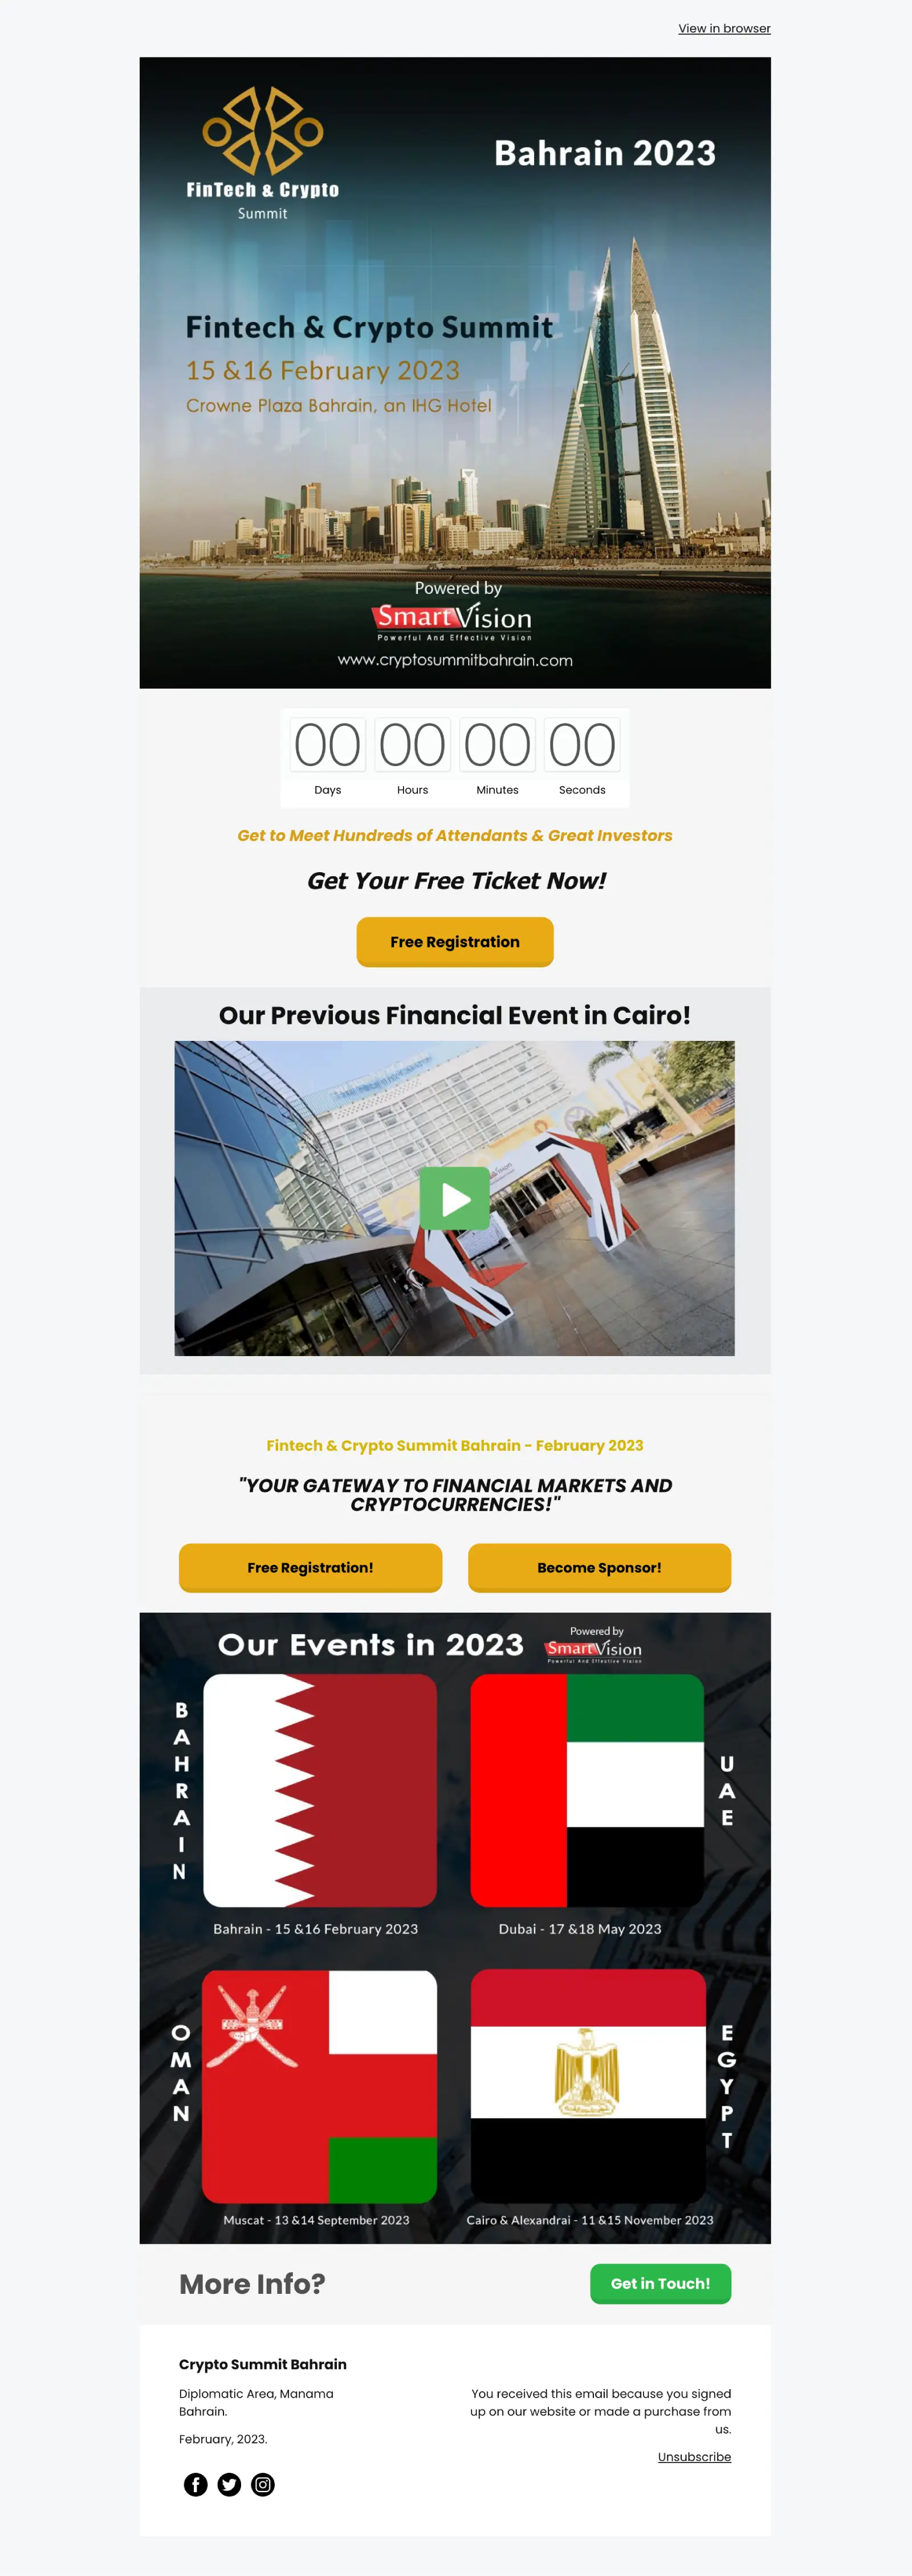 Event countdown email - Crypto Summit Bahrain event email example